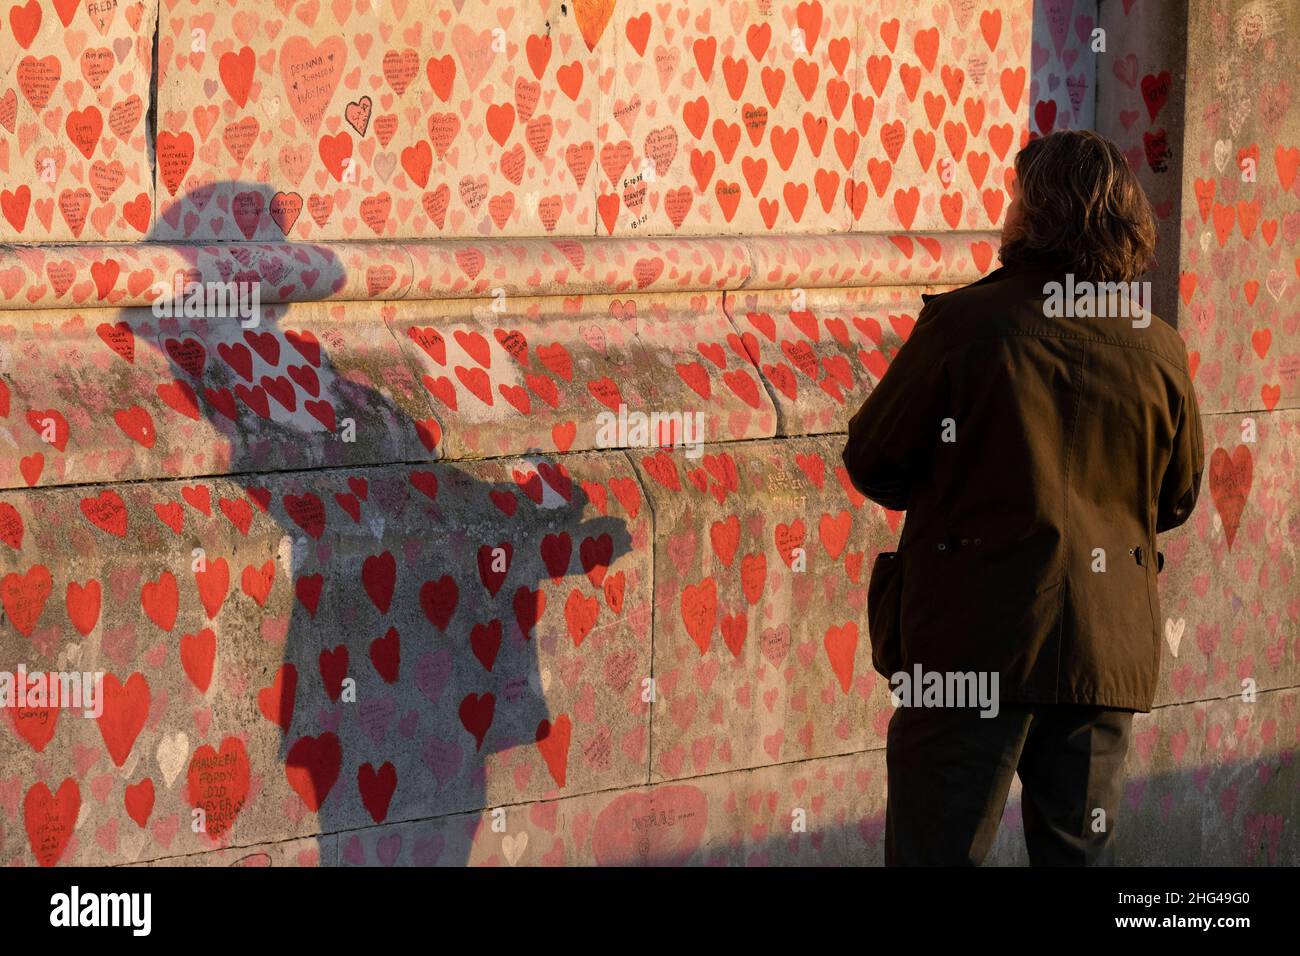 A man colours in a red heart on the National Covid Memorial Wall, a tribute to the 152,000 British victims of the Coronavirus pandemic, on 17th January 2022, in London, England. Bereaved family and friends of Covid-19 victims have added their own tributes on the wall located outside St Thomas' Hospital, and which faces the Houses of Parliament in Westminster. Stock Photo